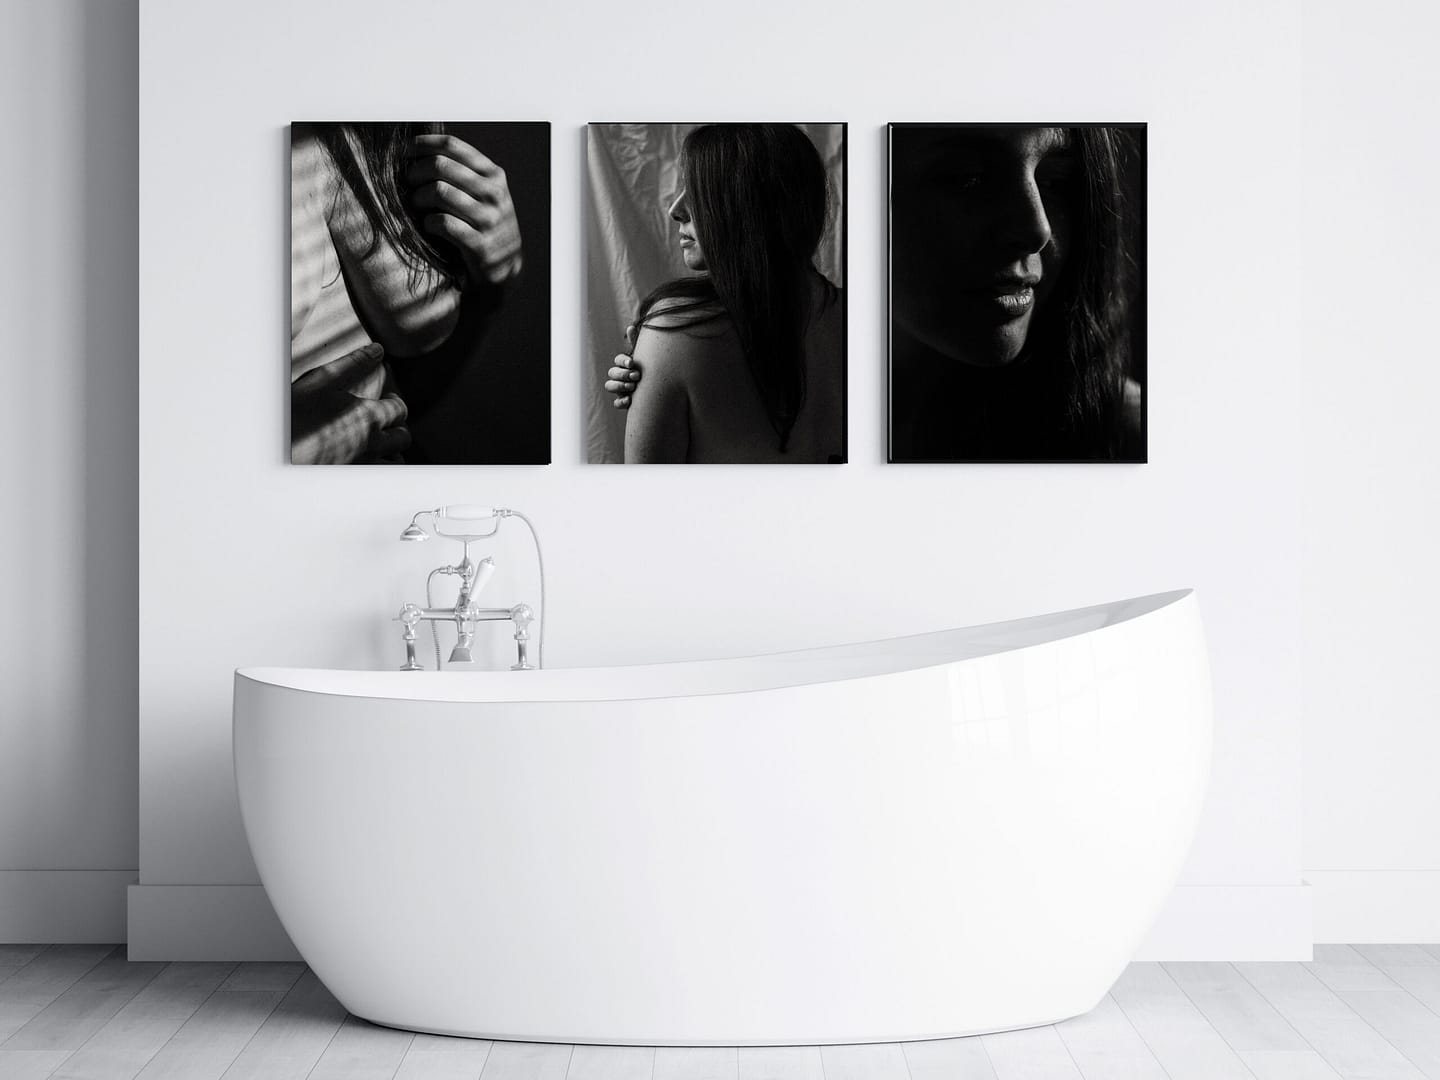 Make Your Boudoir Wall Art (Hint: Use Mateus Products to Help!): Vancouver Boudoir Products